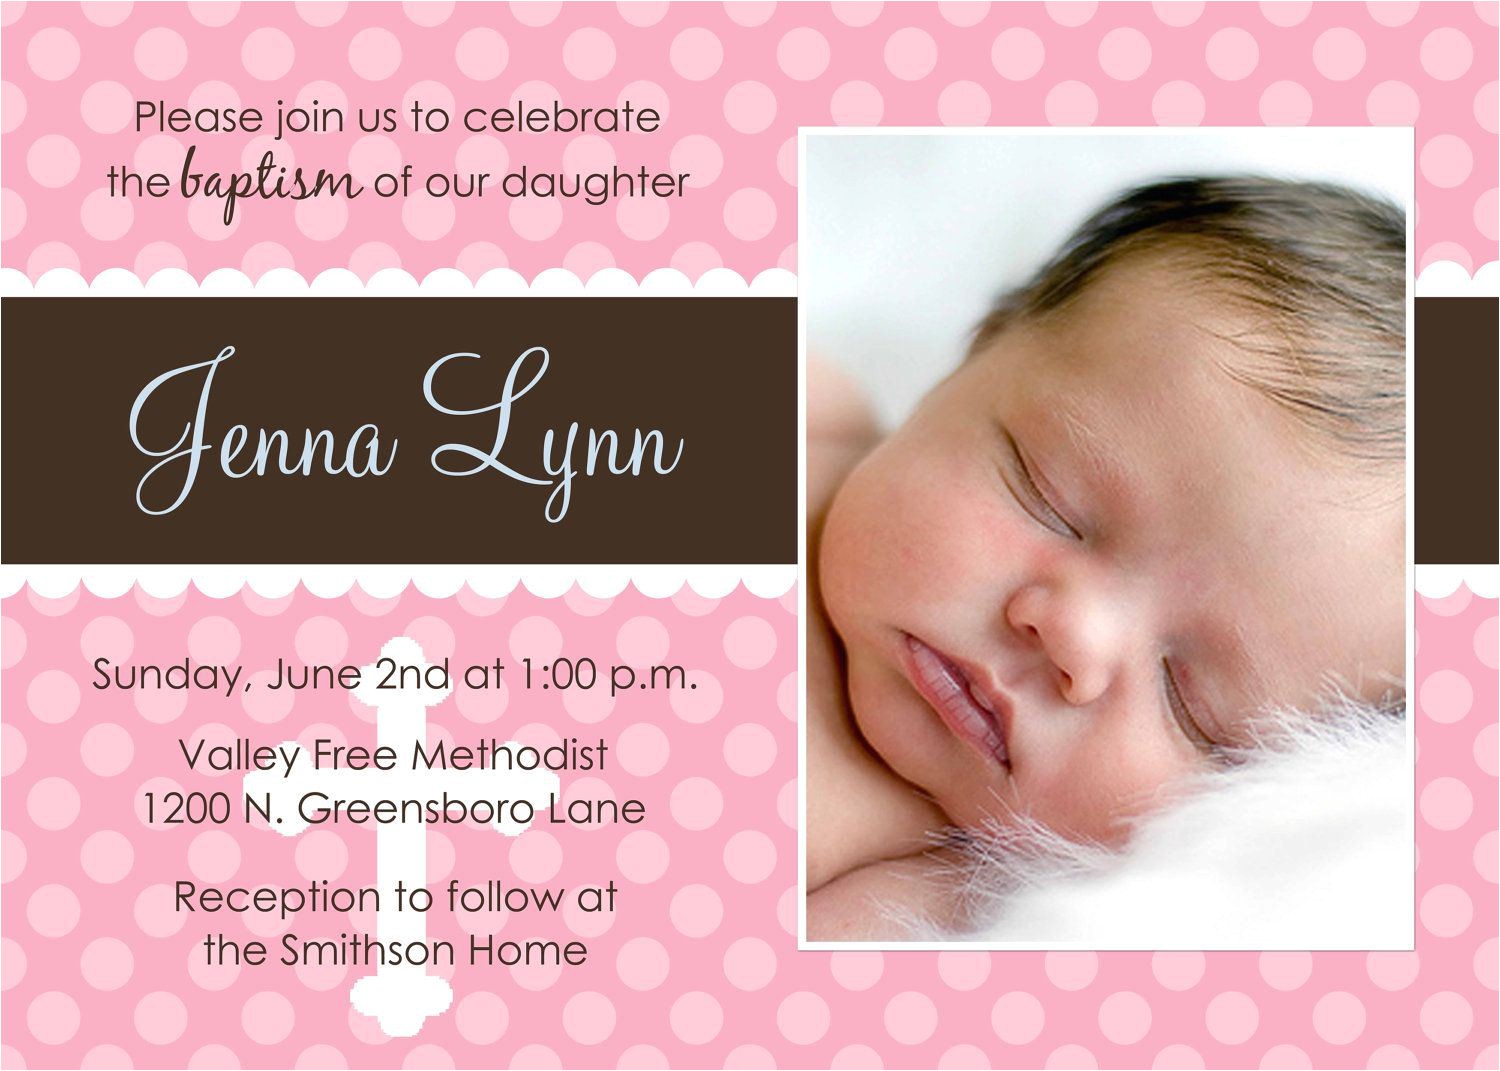 Baptism Invitation Ideas for Baby Girl Baby Girl Baptism Invitations – Gangcraft